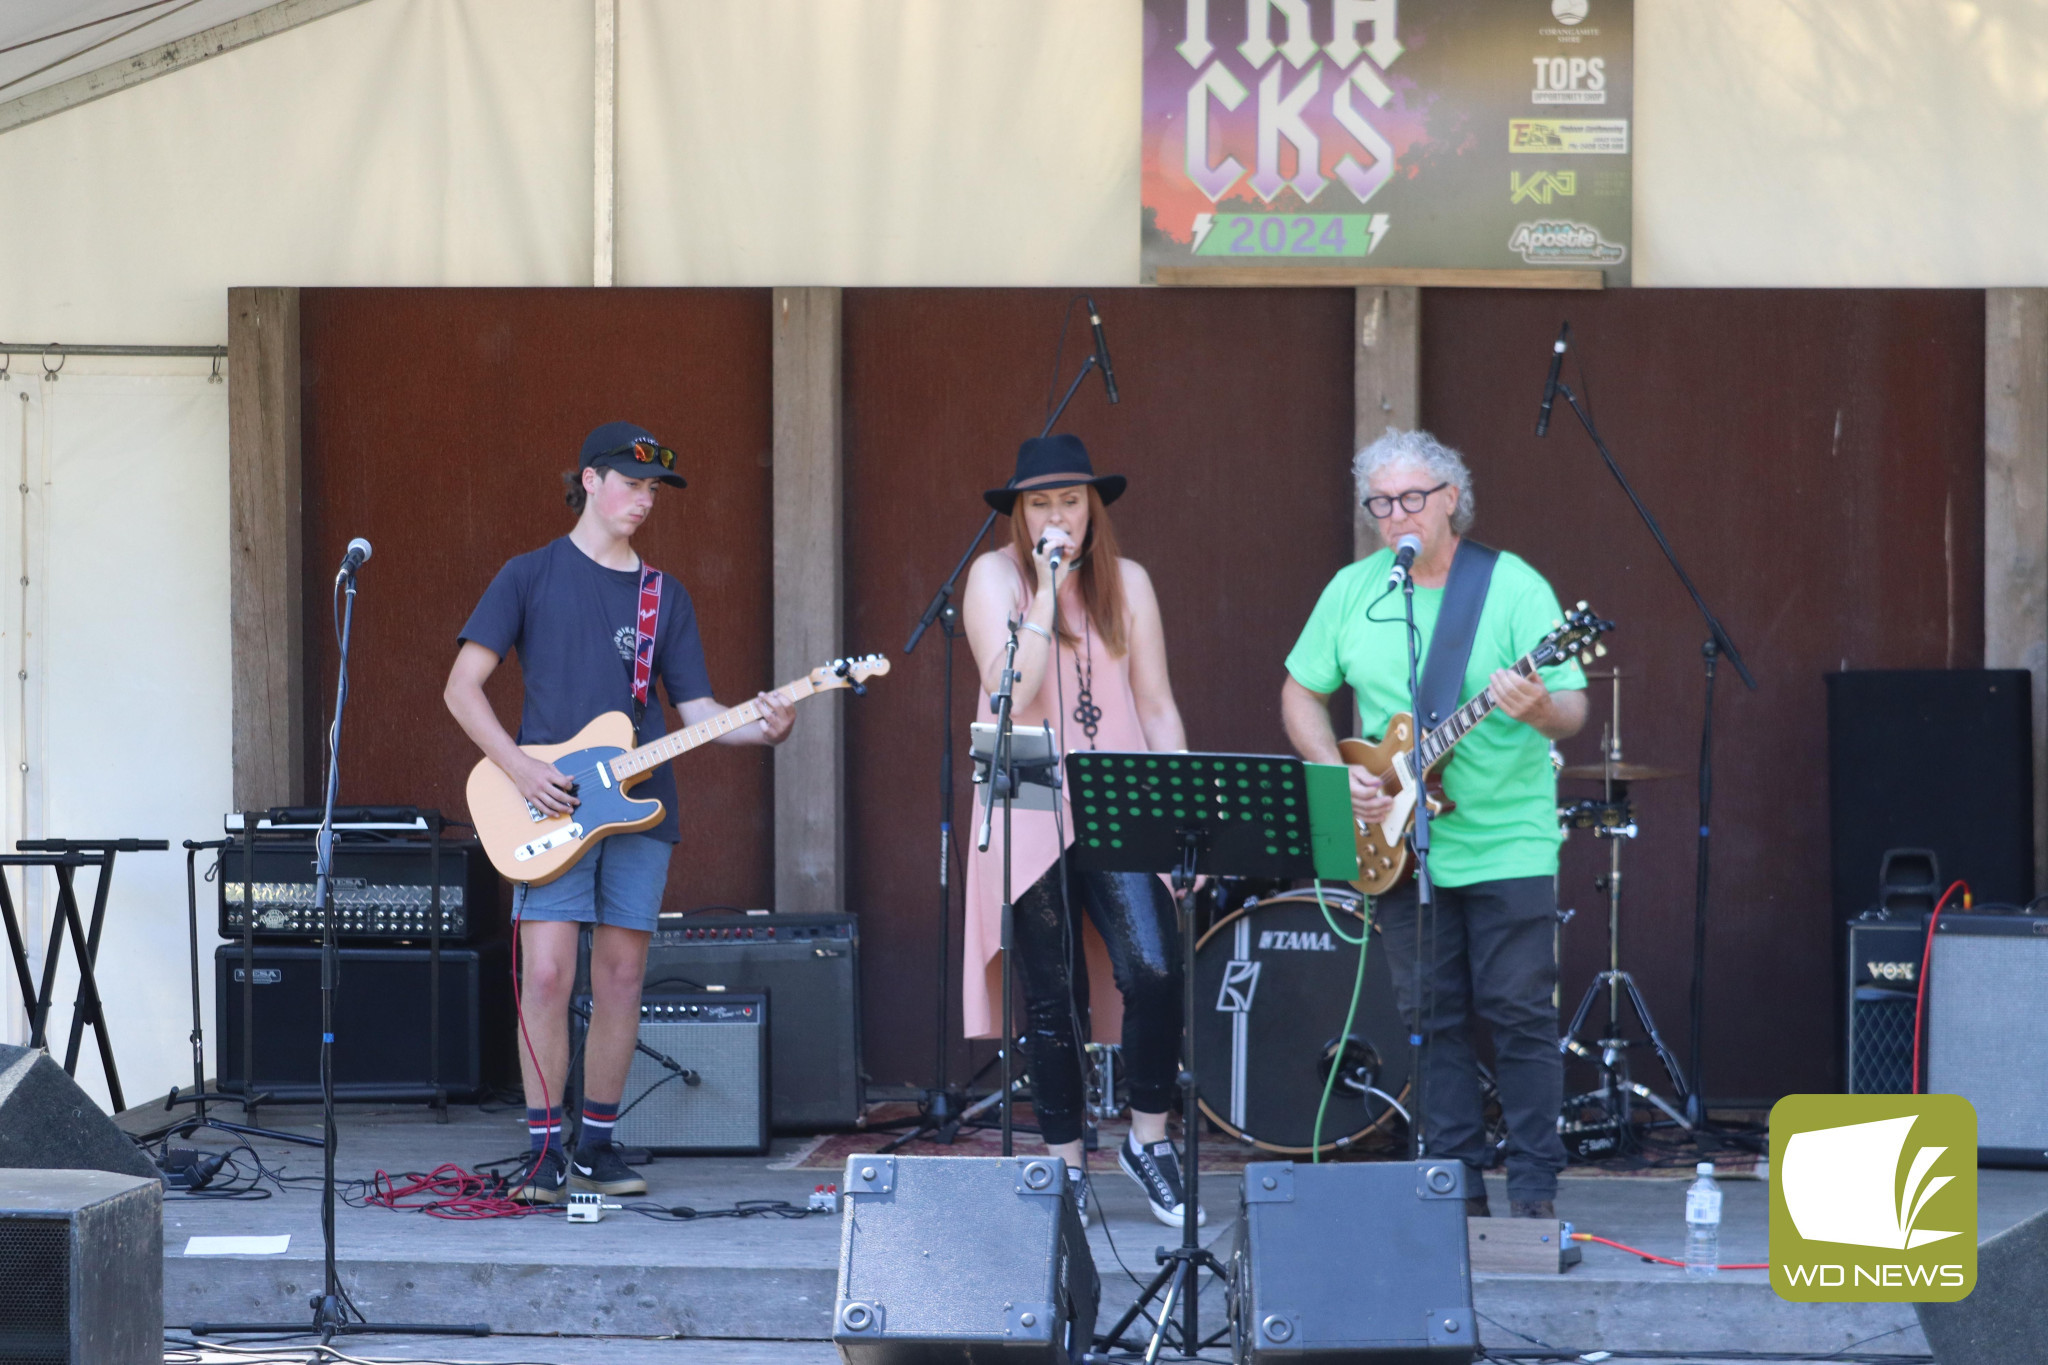 Music festival: The annual TRACKS Music Festival drew strong numbers on Saturday, with a host of local bands including Rockit, entertaining the crowd.